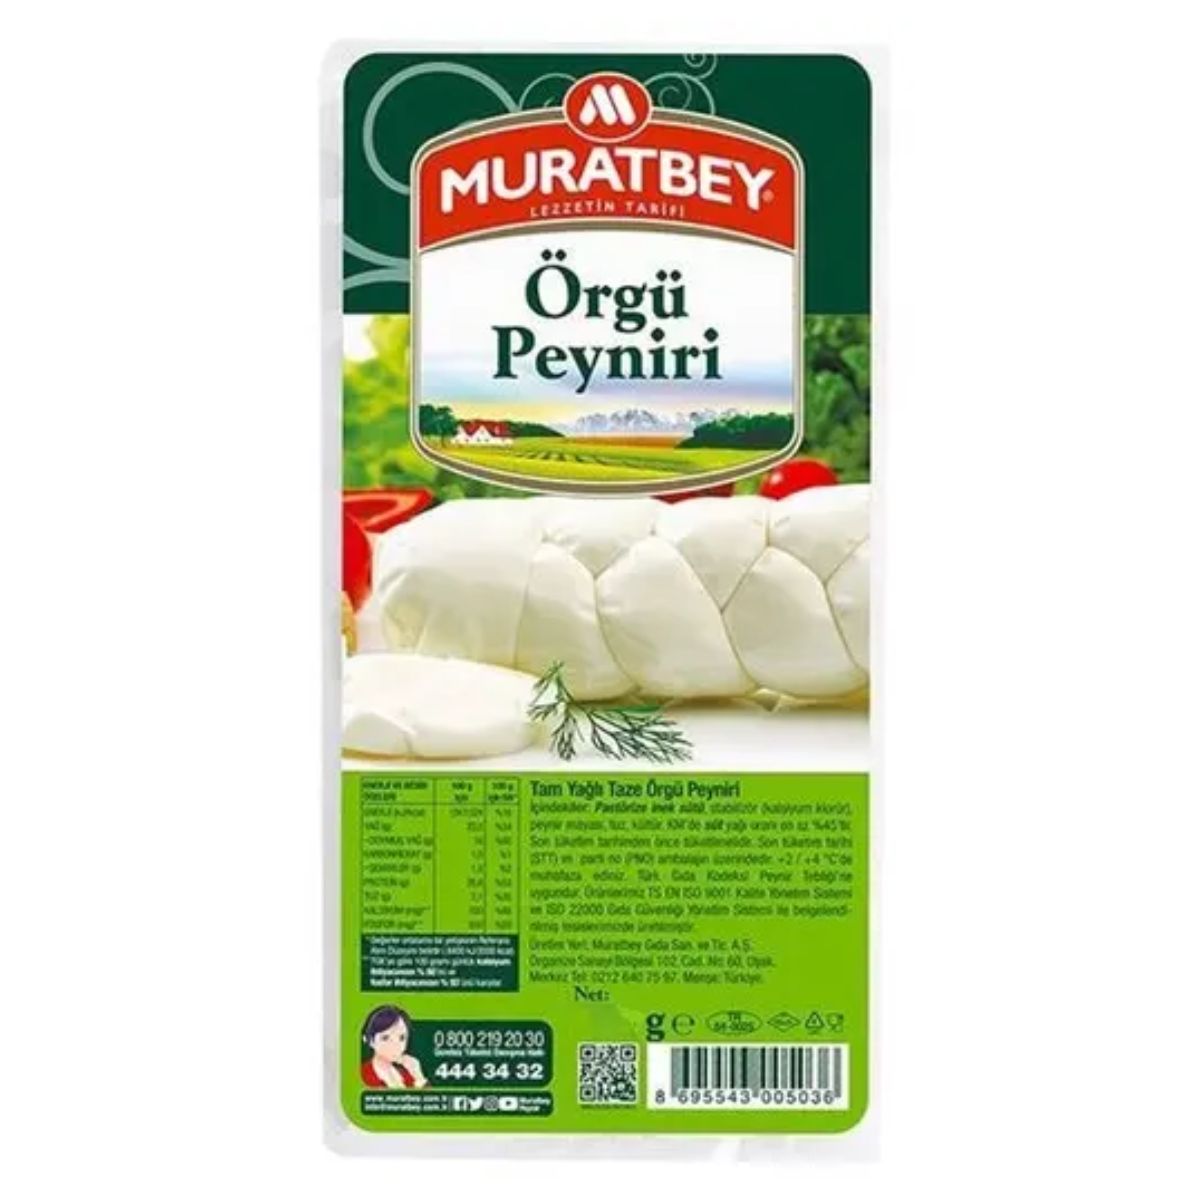 A package of Muratbey - Orgu Cheese - 150g.